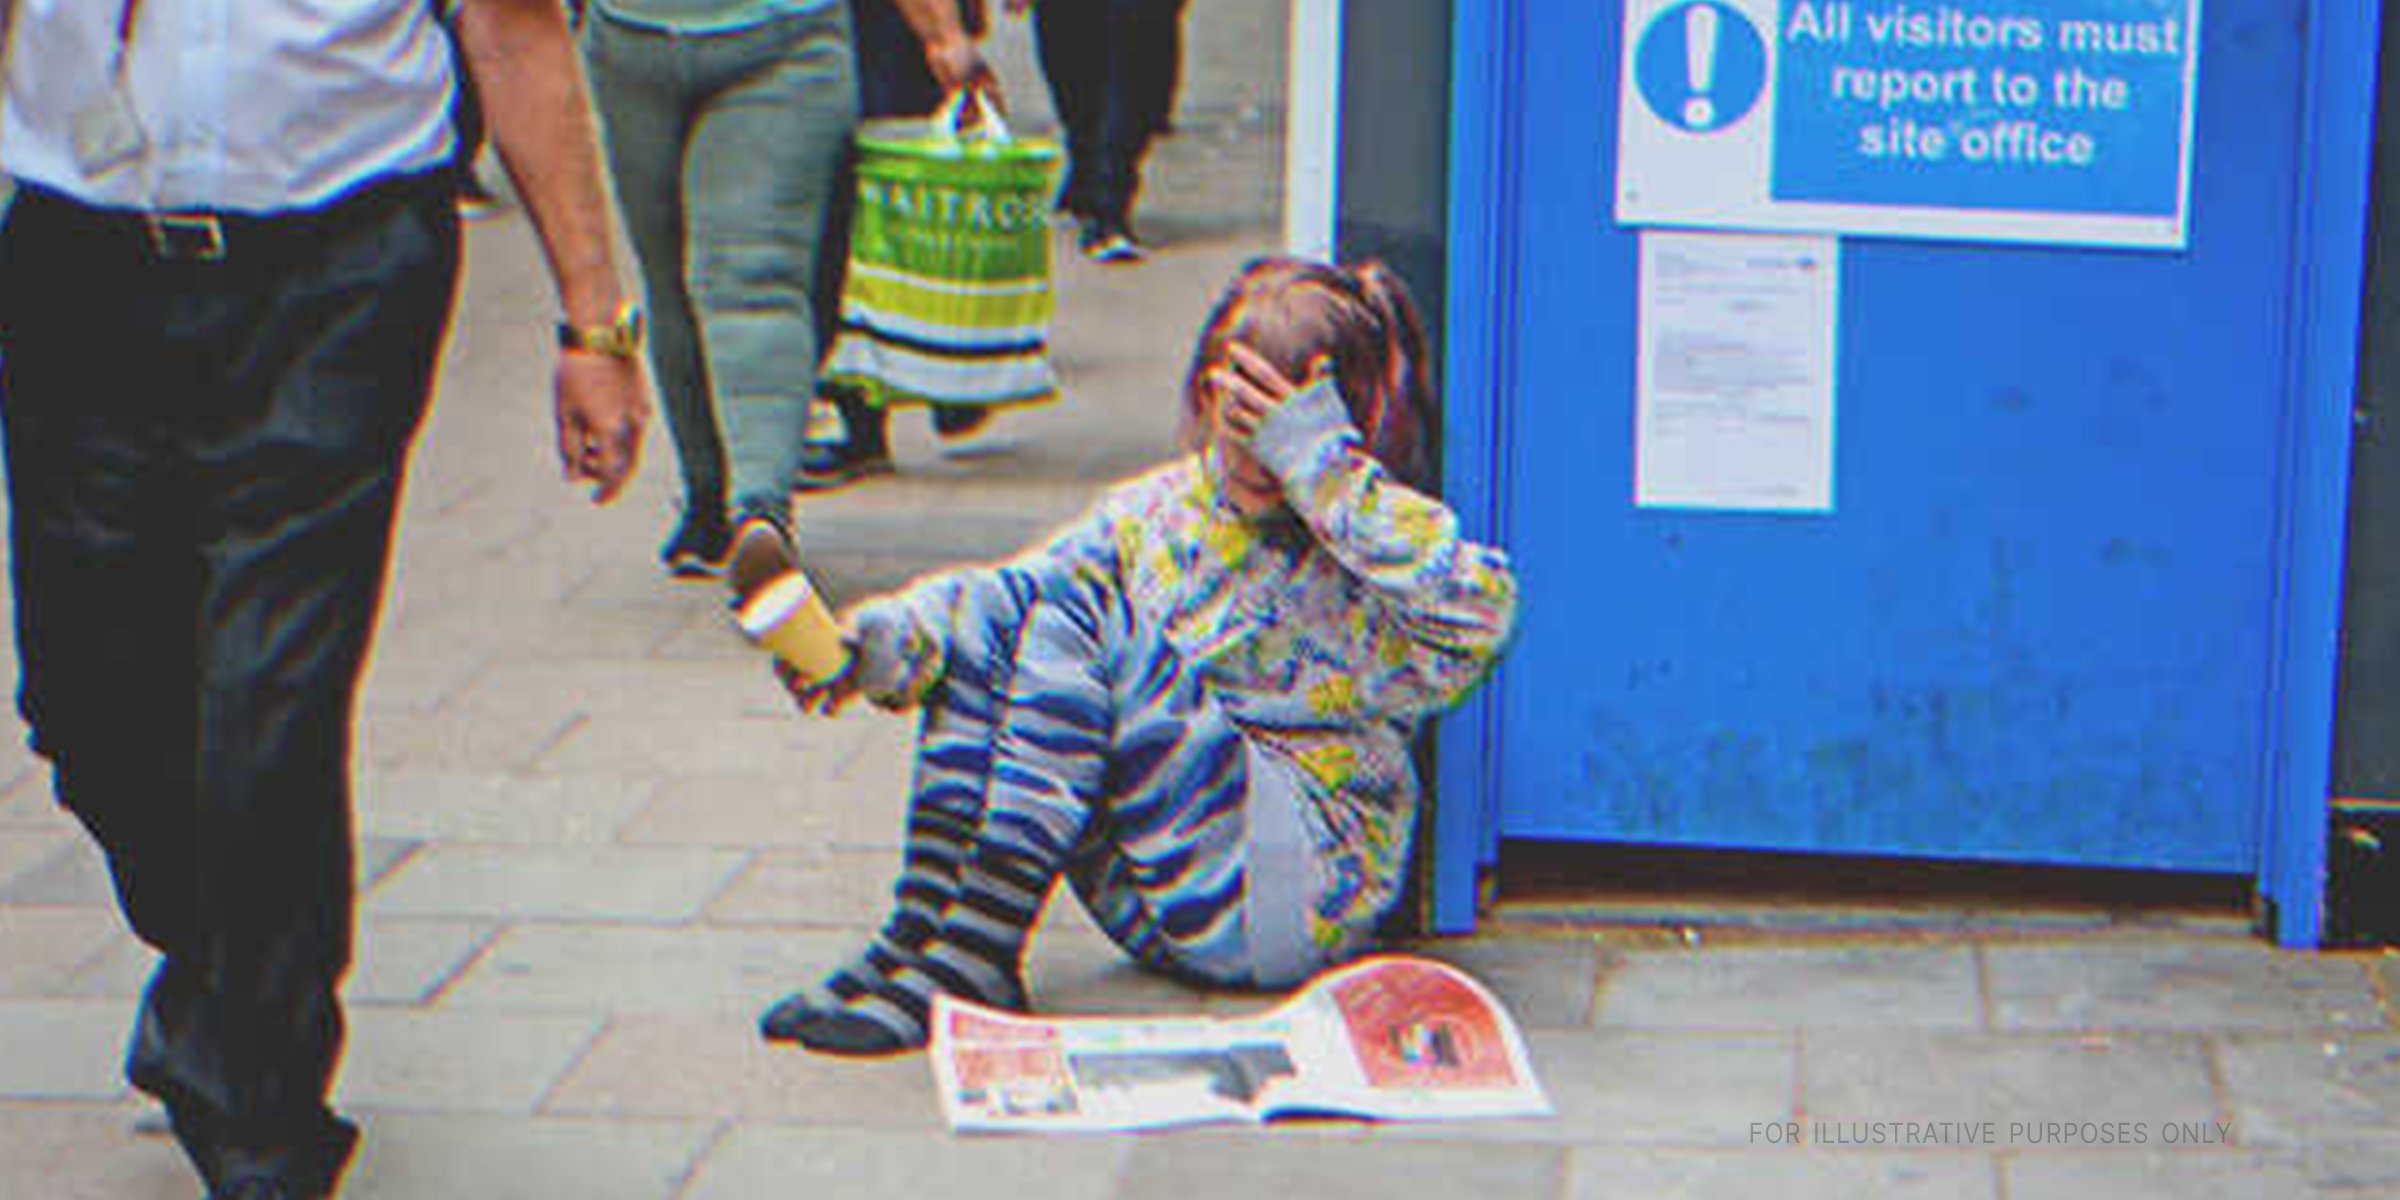 Young Girl Begging On The Street. | Source: Shutterstock